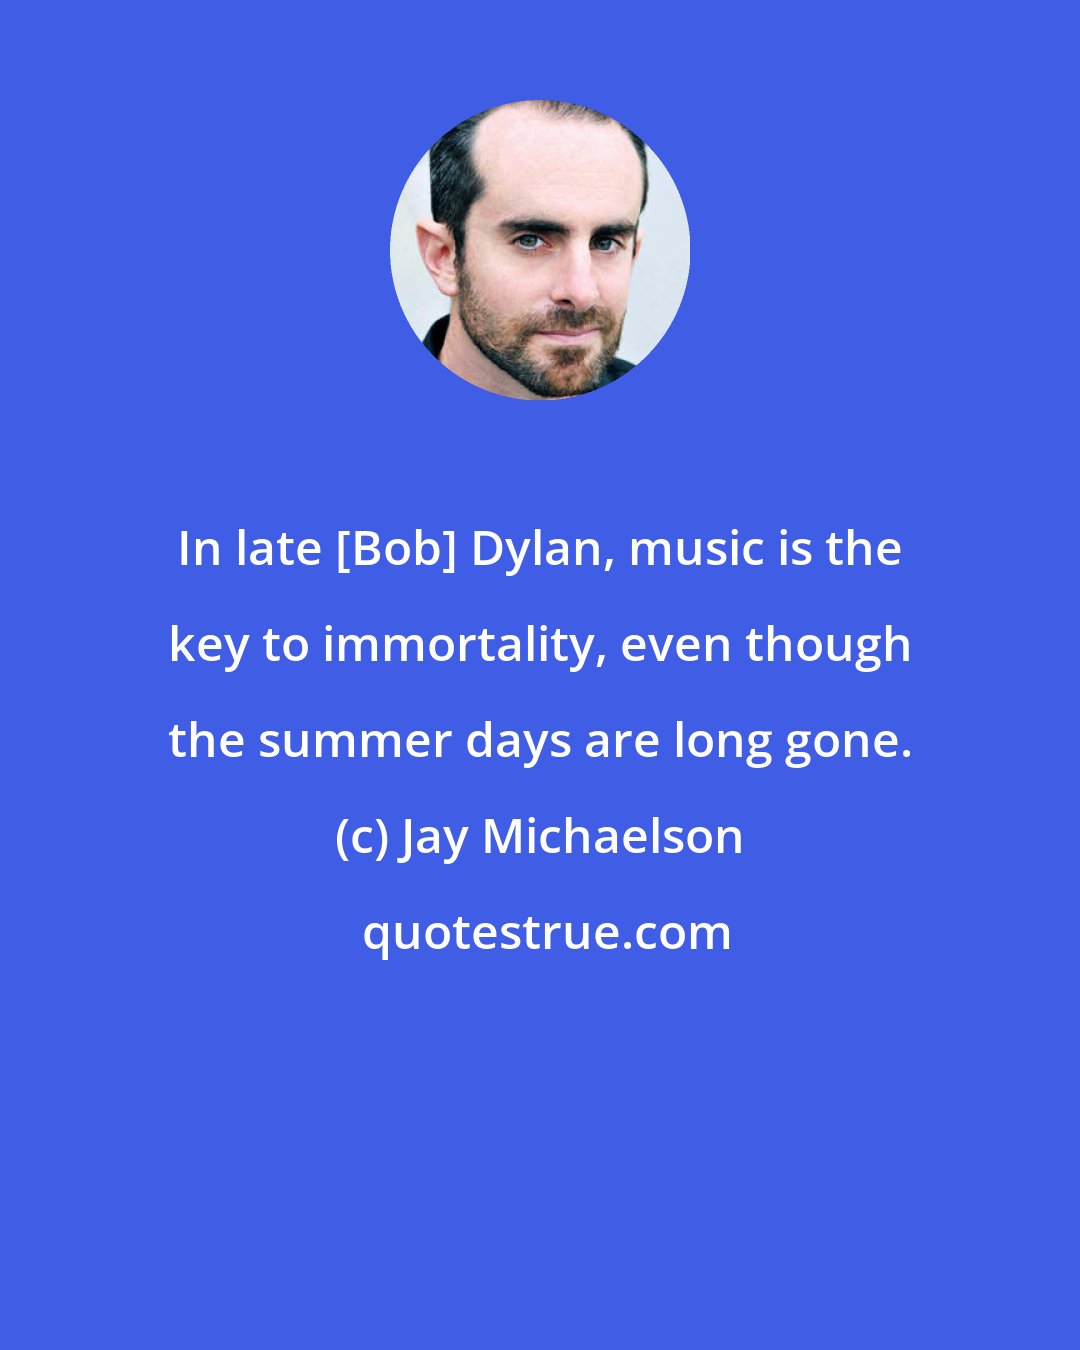 Jay Michaelson: In late [Bob] Dylan, music is the key to immortality, even though the summer days are long gone.